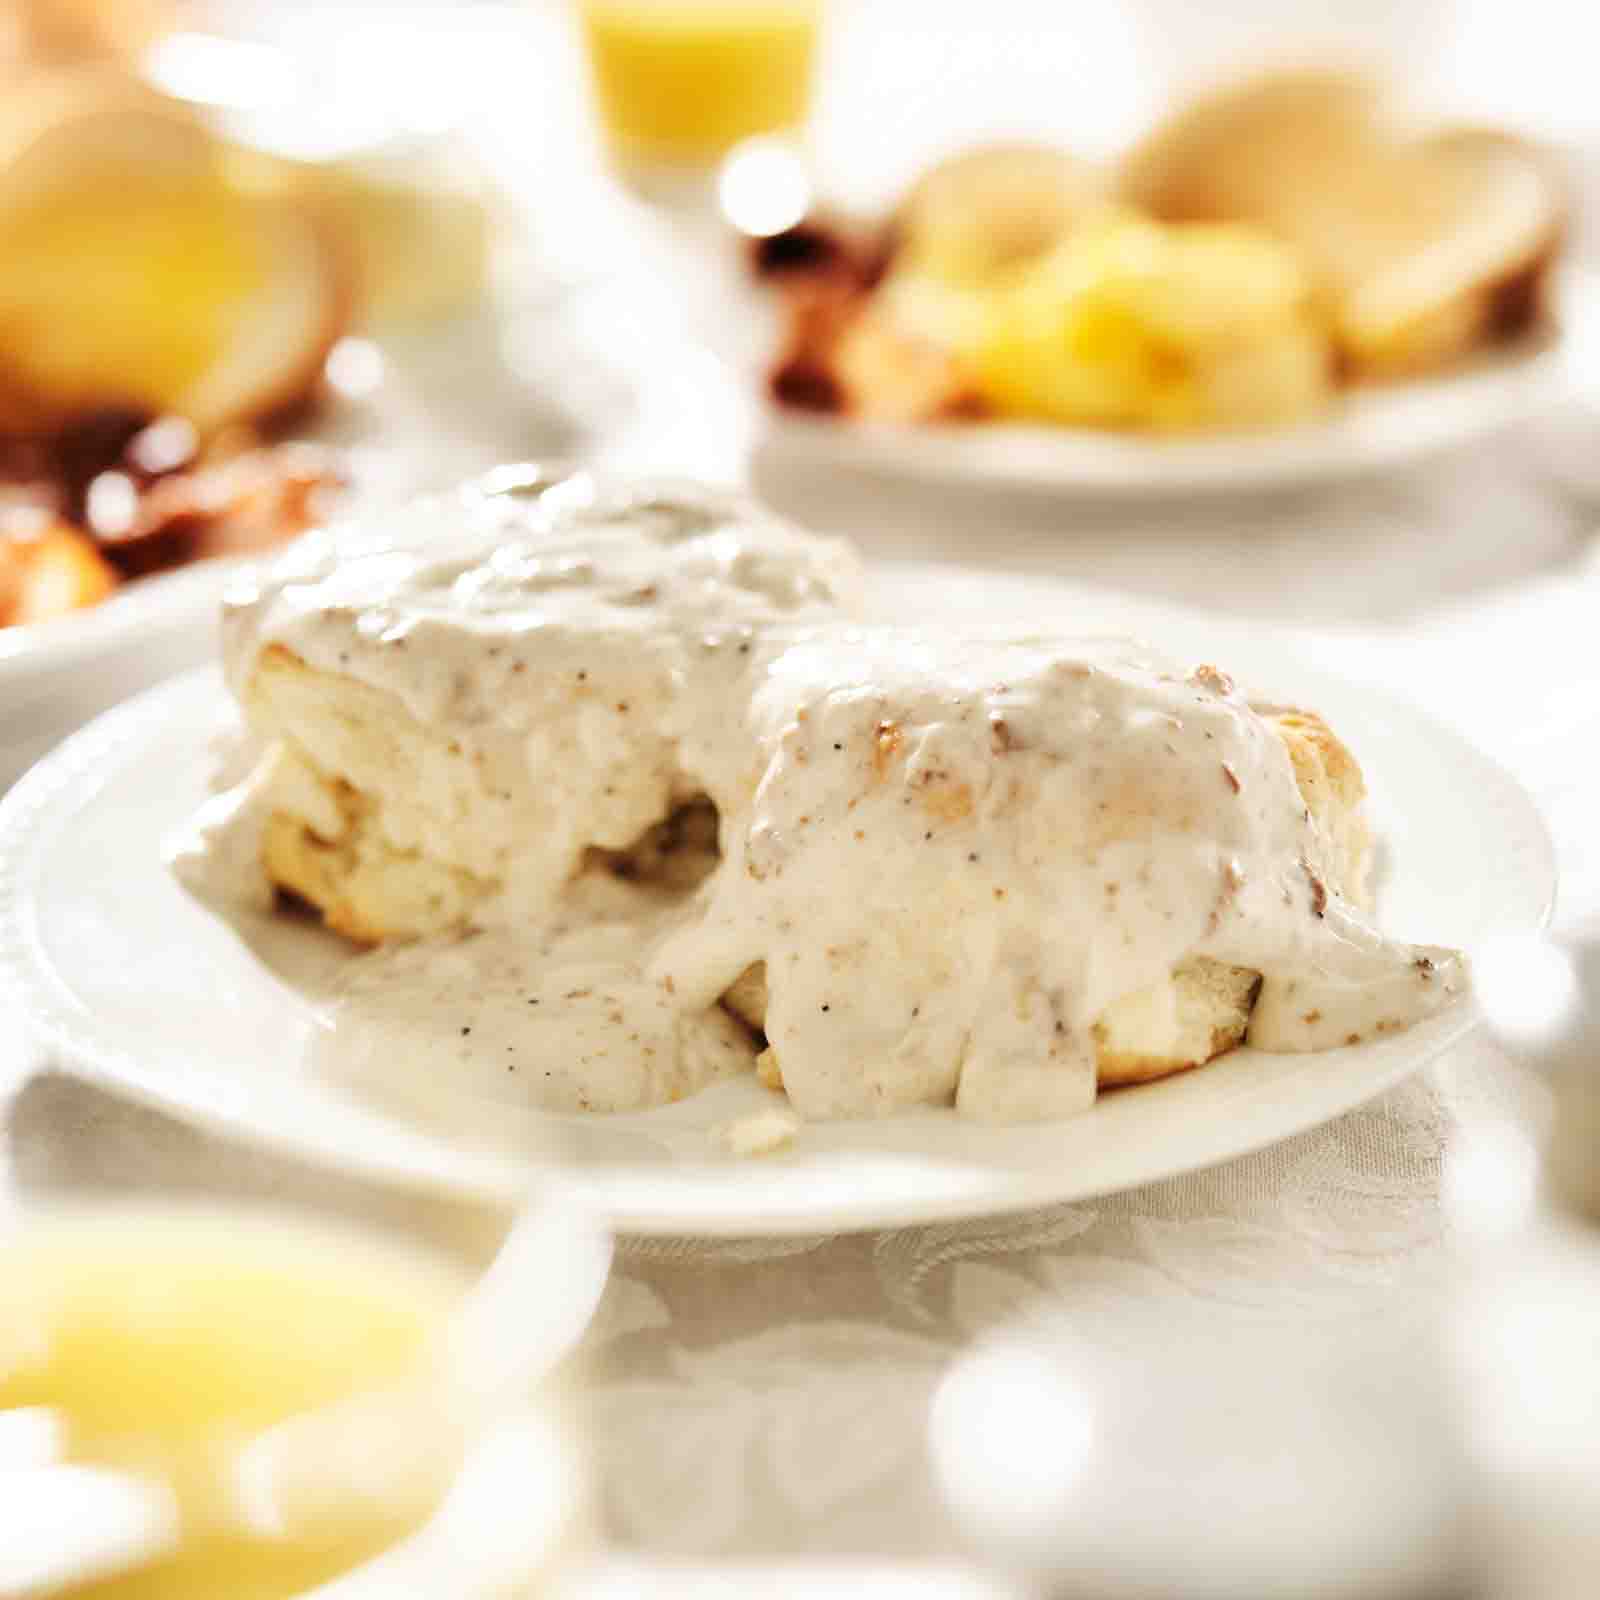 Southern Biscuits and Gravy Recipe How to Make Breakfast Casserole Ideas and Southern Dishes